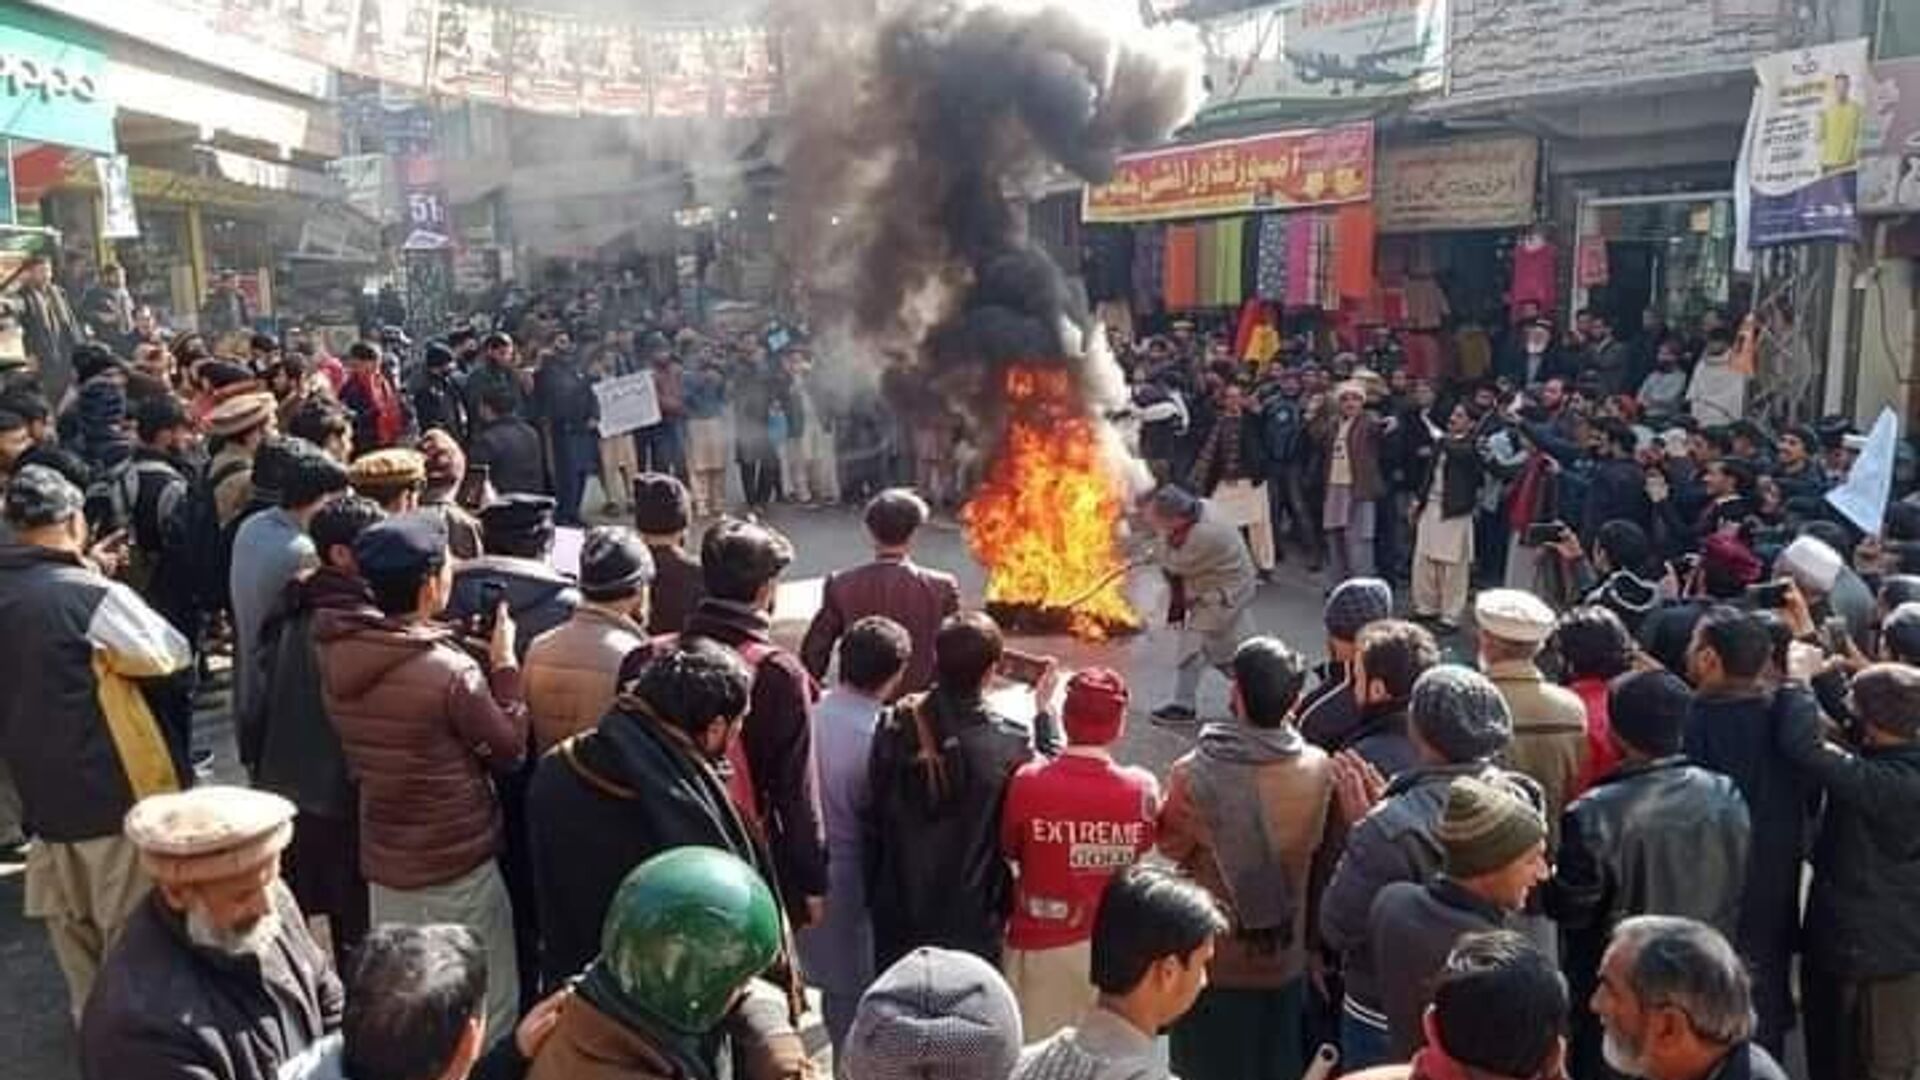 Massive protests erupt in Gilgit-Baltistan over rising prices and gross neglect by the government - Sputnik India, 1920, 17.01.2023